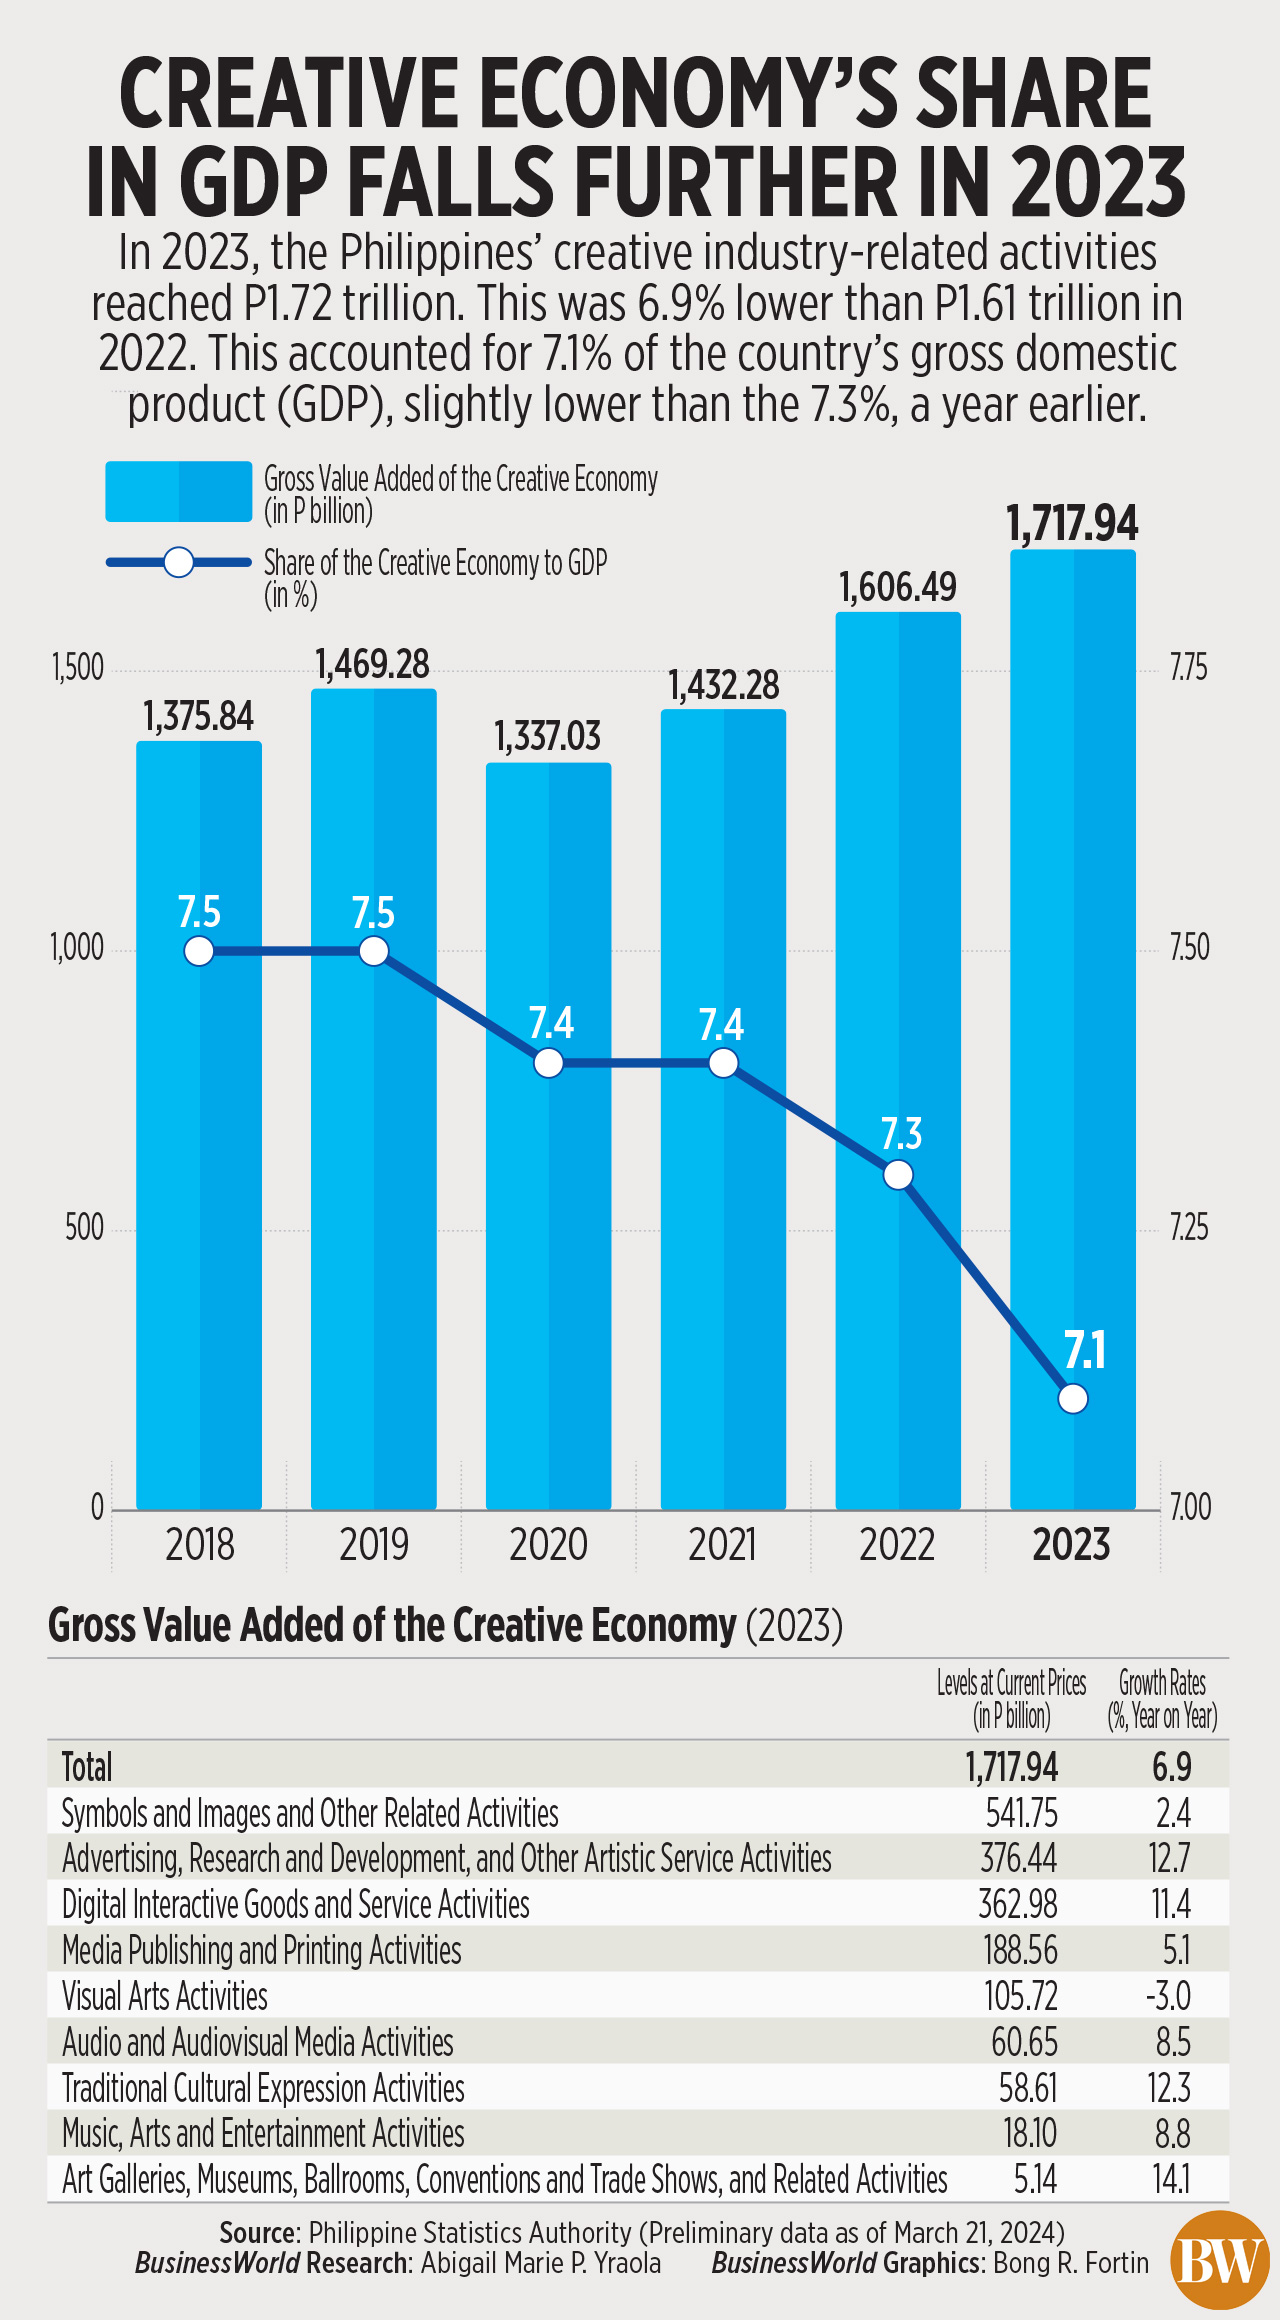 Creative economy’s share in GDP falls further in 2023